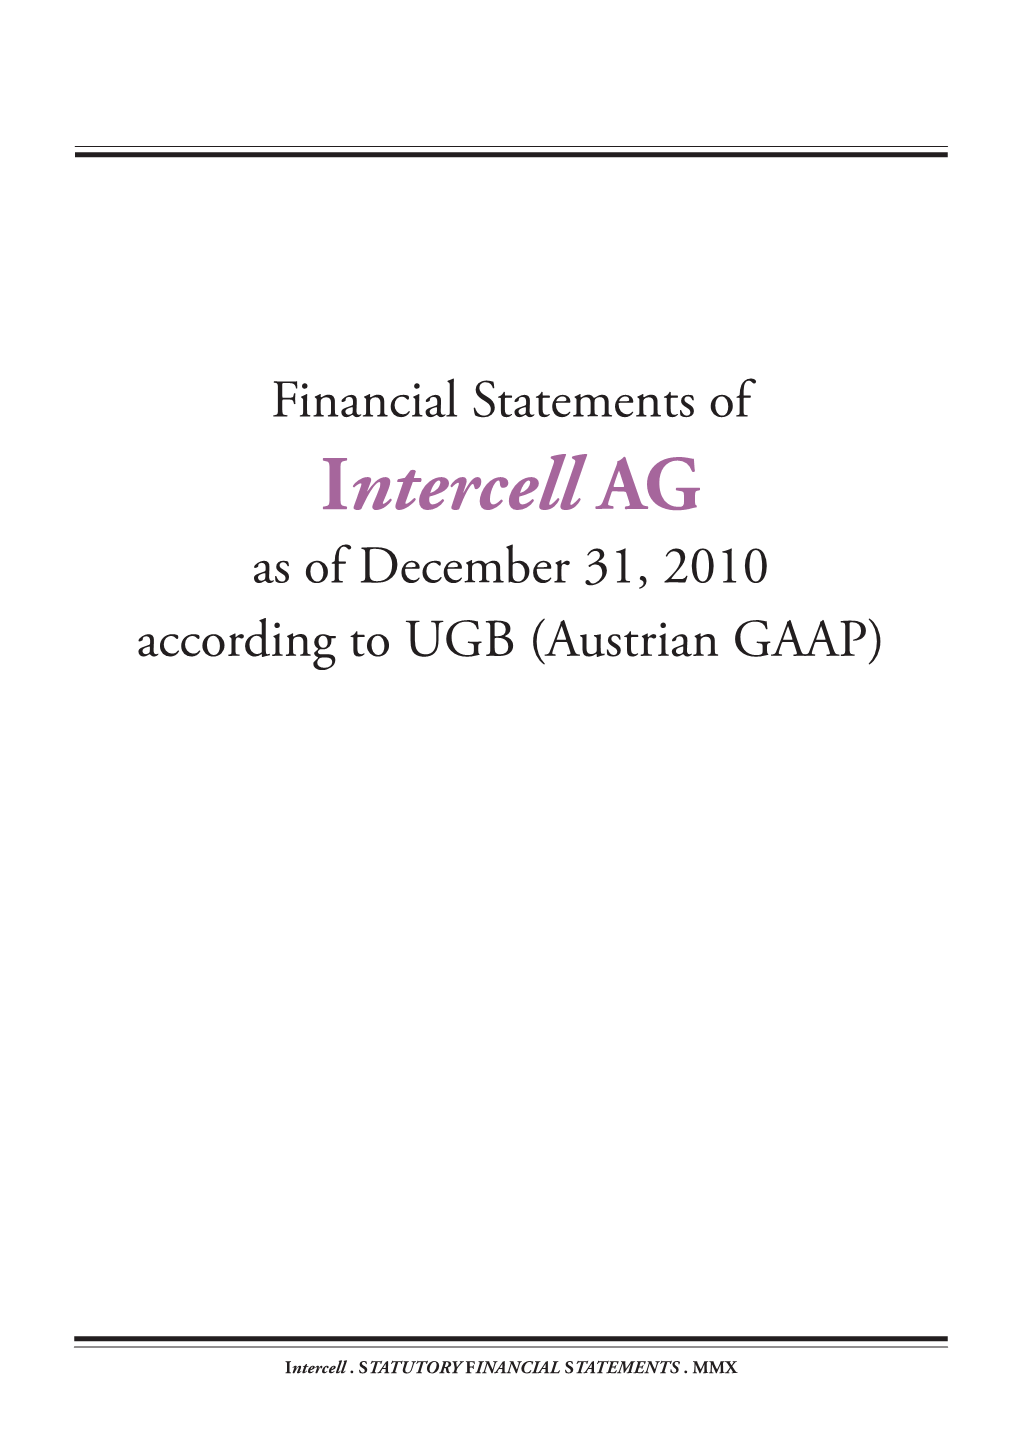 Financial Statements of Intercell AG As of December 31, 2010 According to UGB (Austrian GAAP)